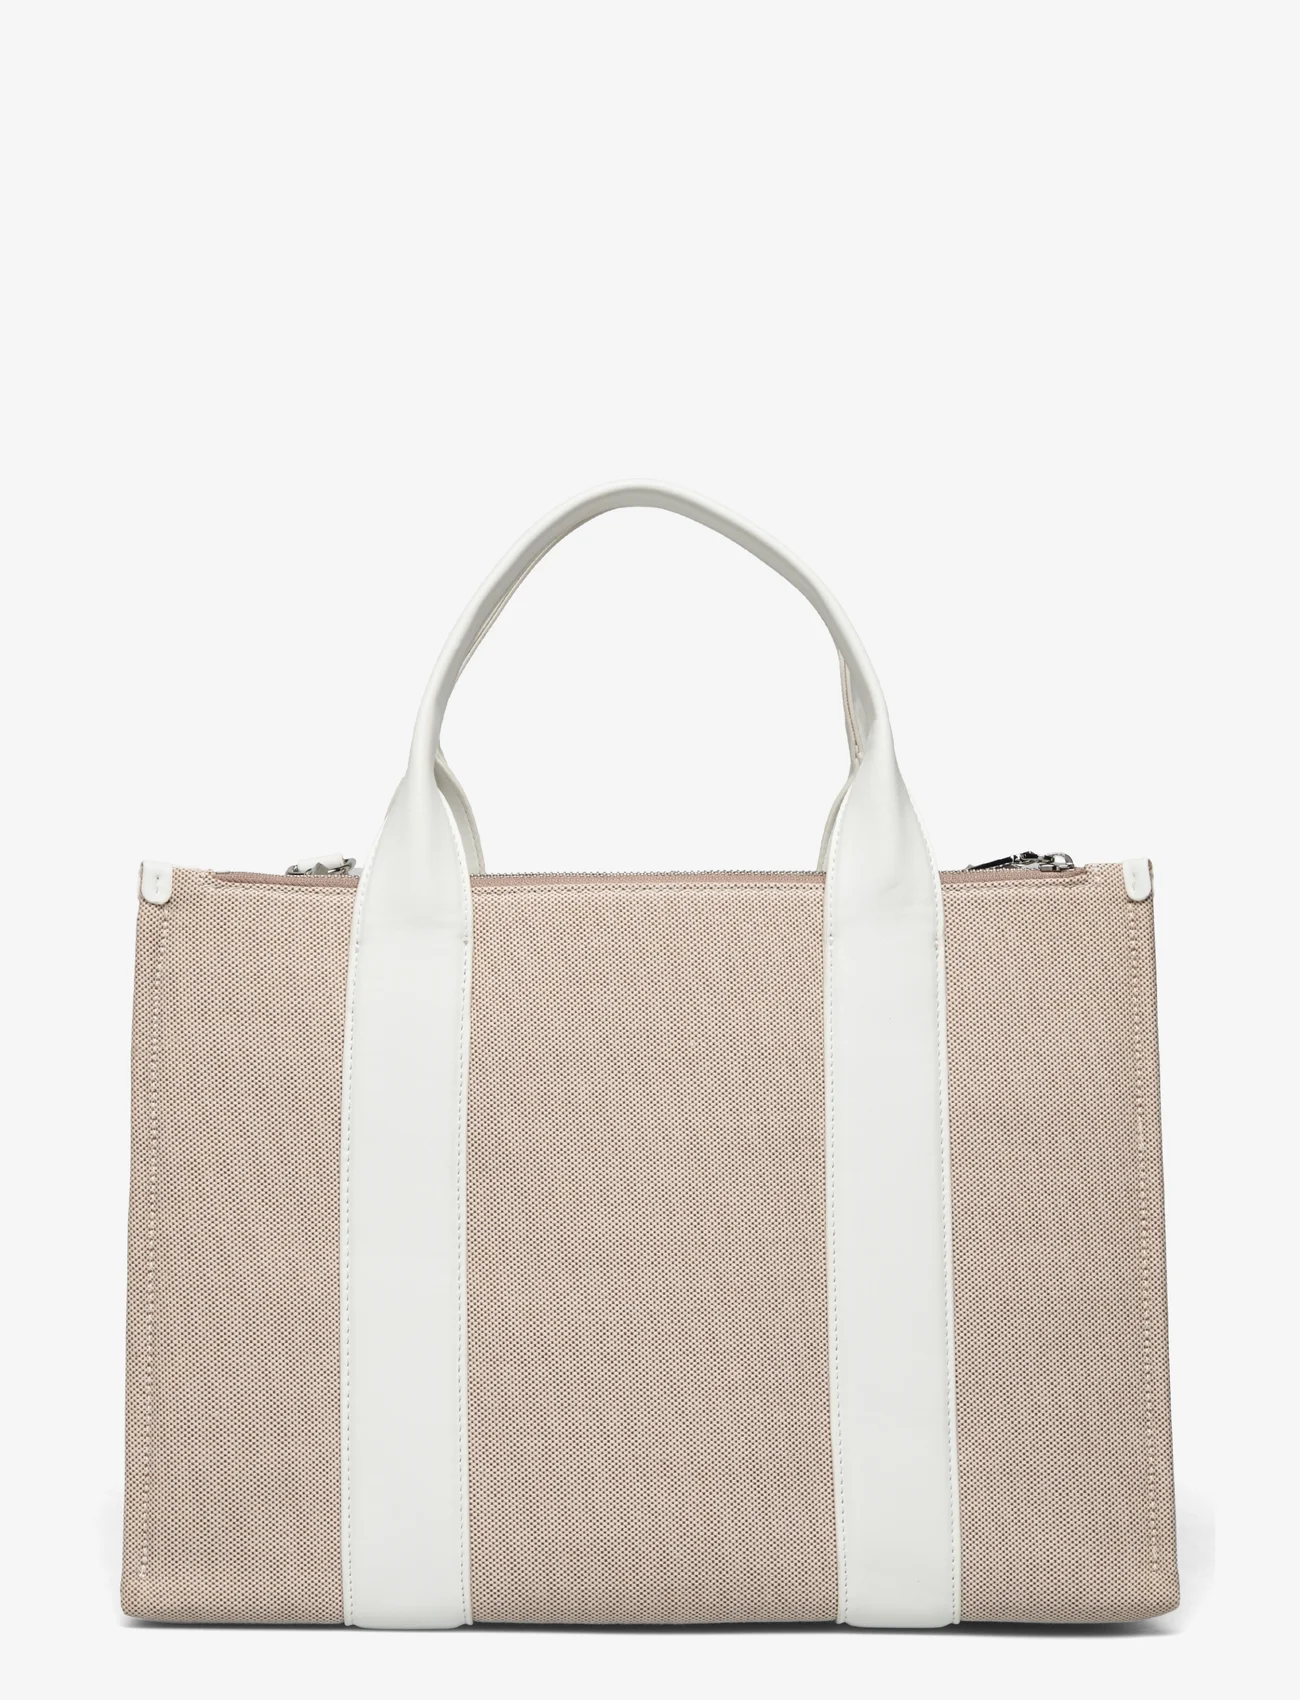 DKNY Bags - HOLLY MD TOTE - tote bags - nwe - nat/white - 1